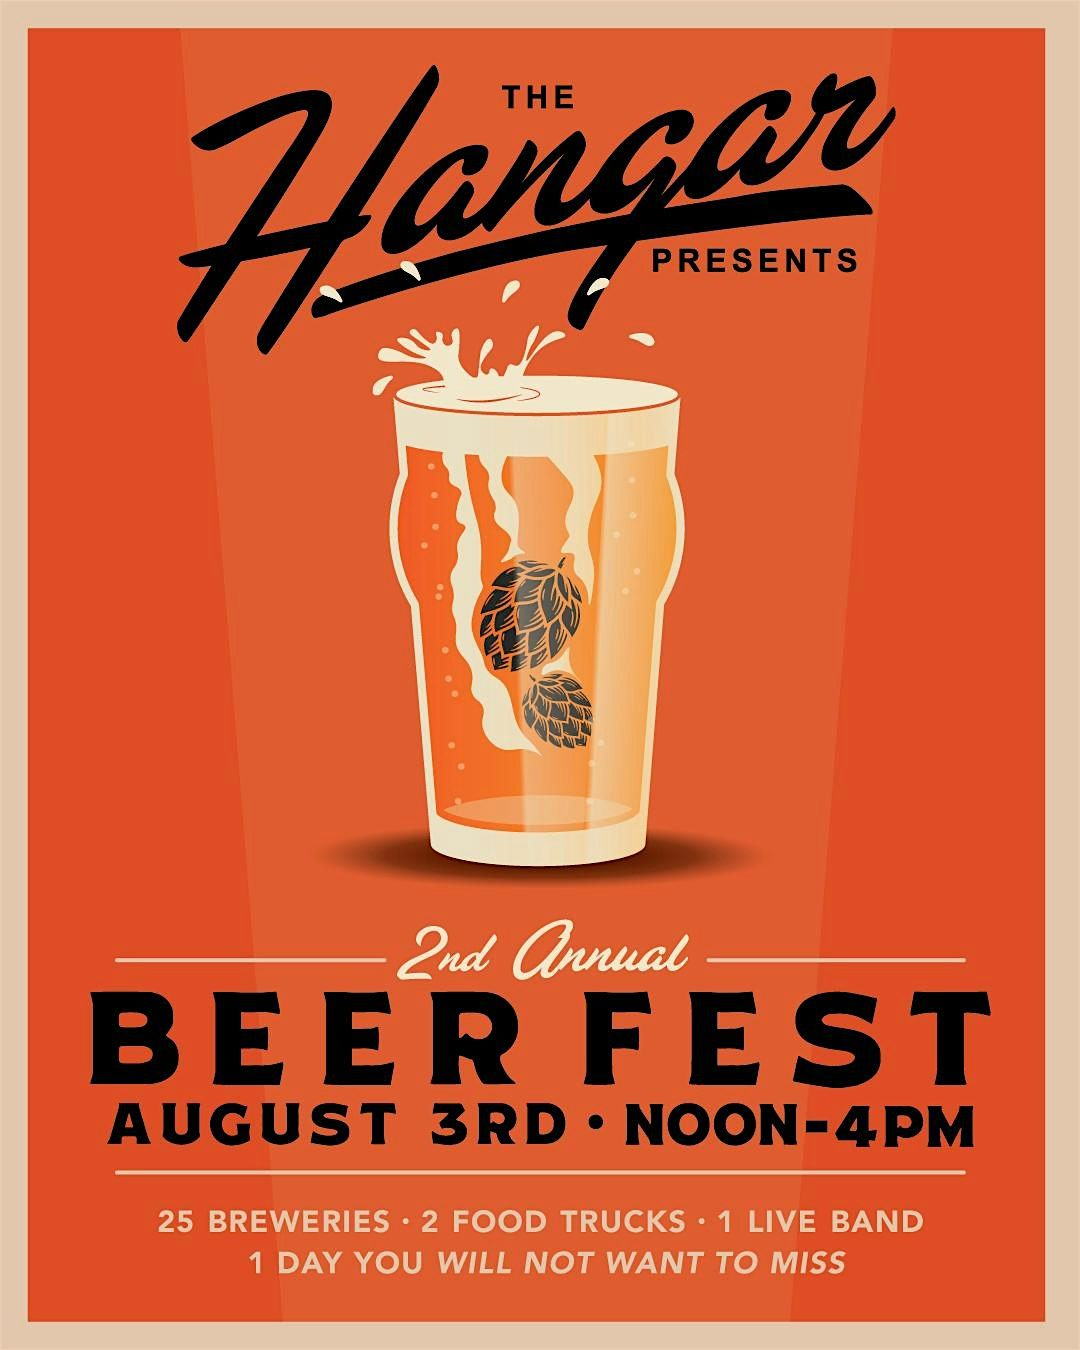 The Hangar's 2nd Annual Beerfest.